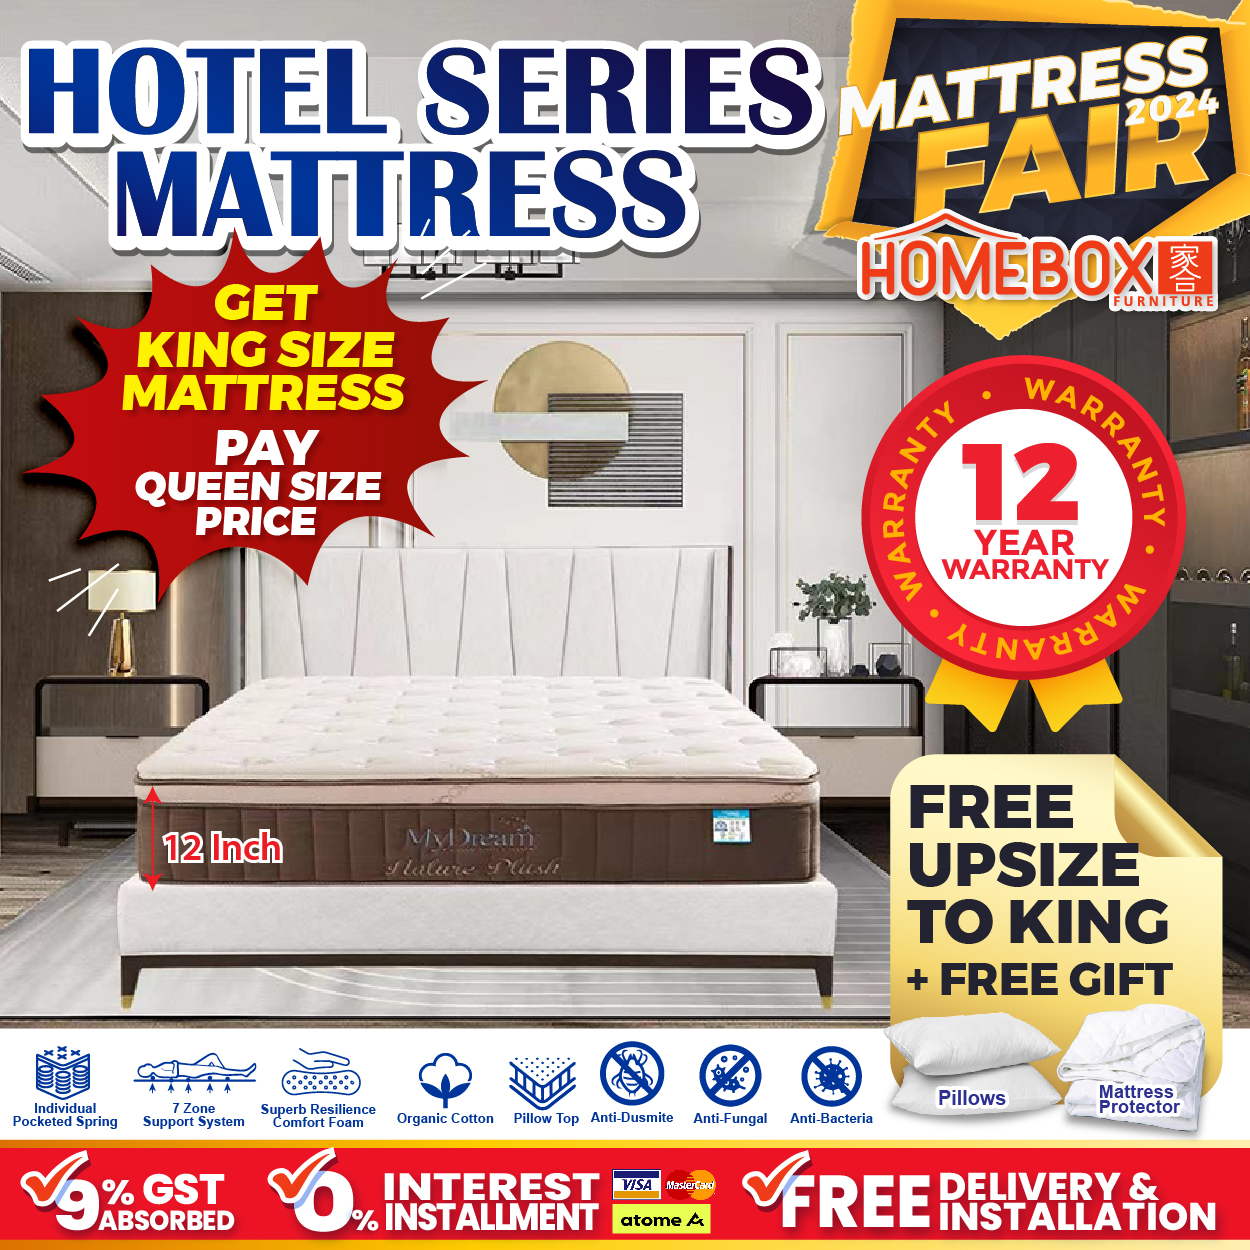 Lobang: Homebox's Biggest Mattress Fair in Aljunied Has Everything At Up To 80% Off From Now Till 5 May 24. Get A Free Mattres Upgrade During The Sale! - 11